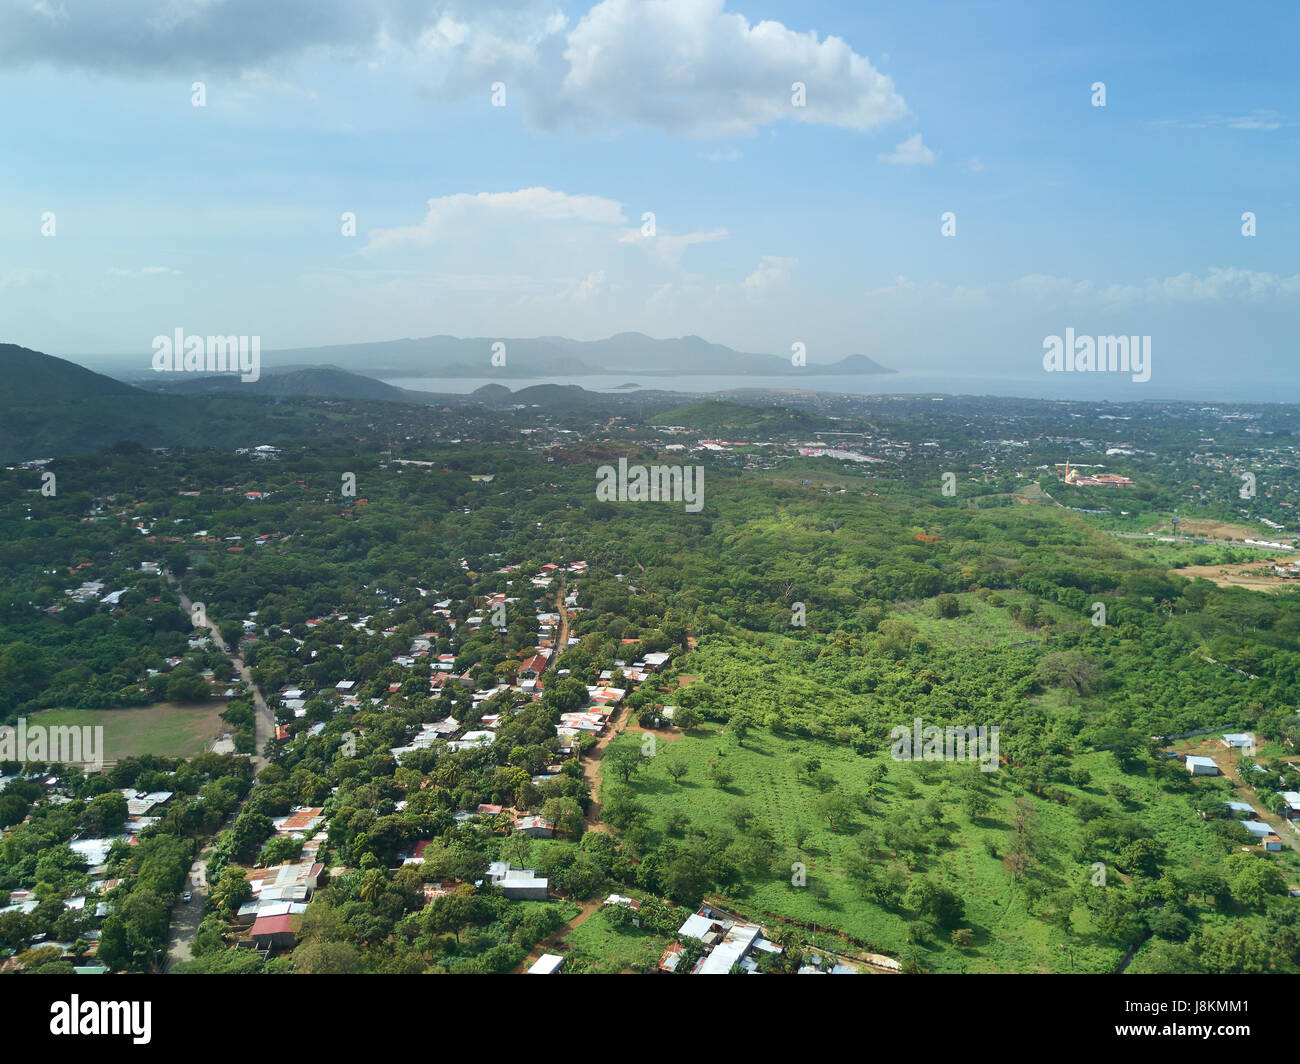 Green nature landscape in Managua city aerial view.Managua capital Nicaragua day time view Stock Photo